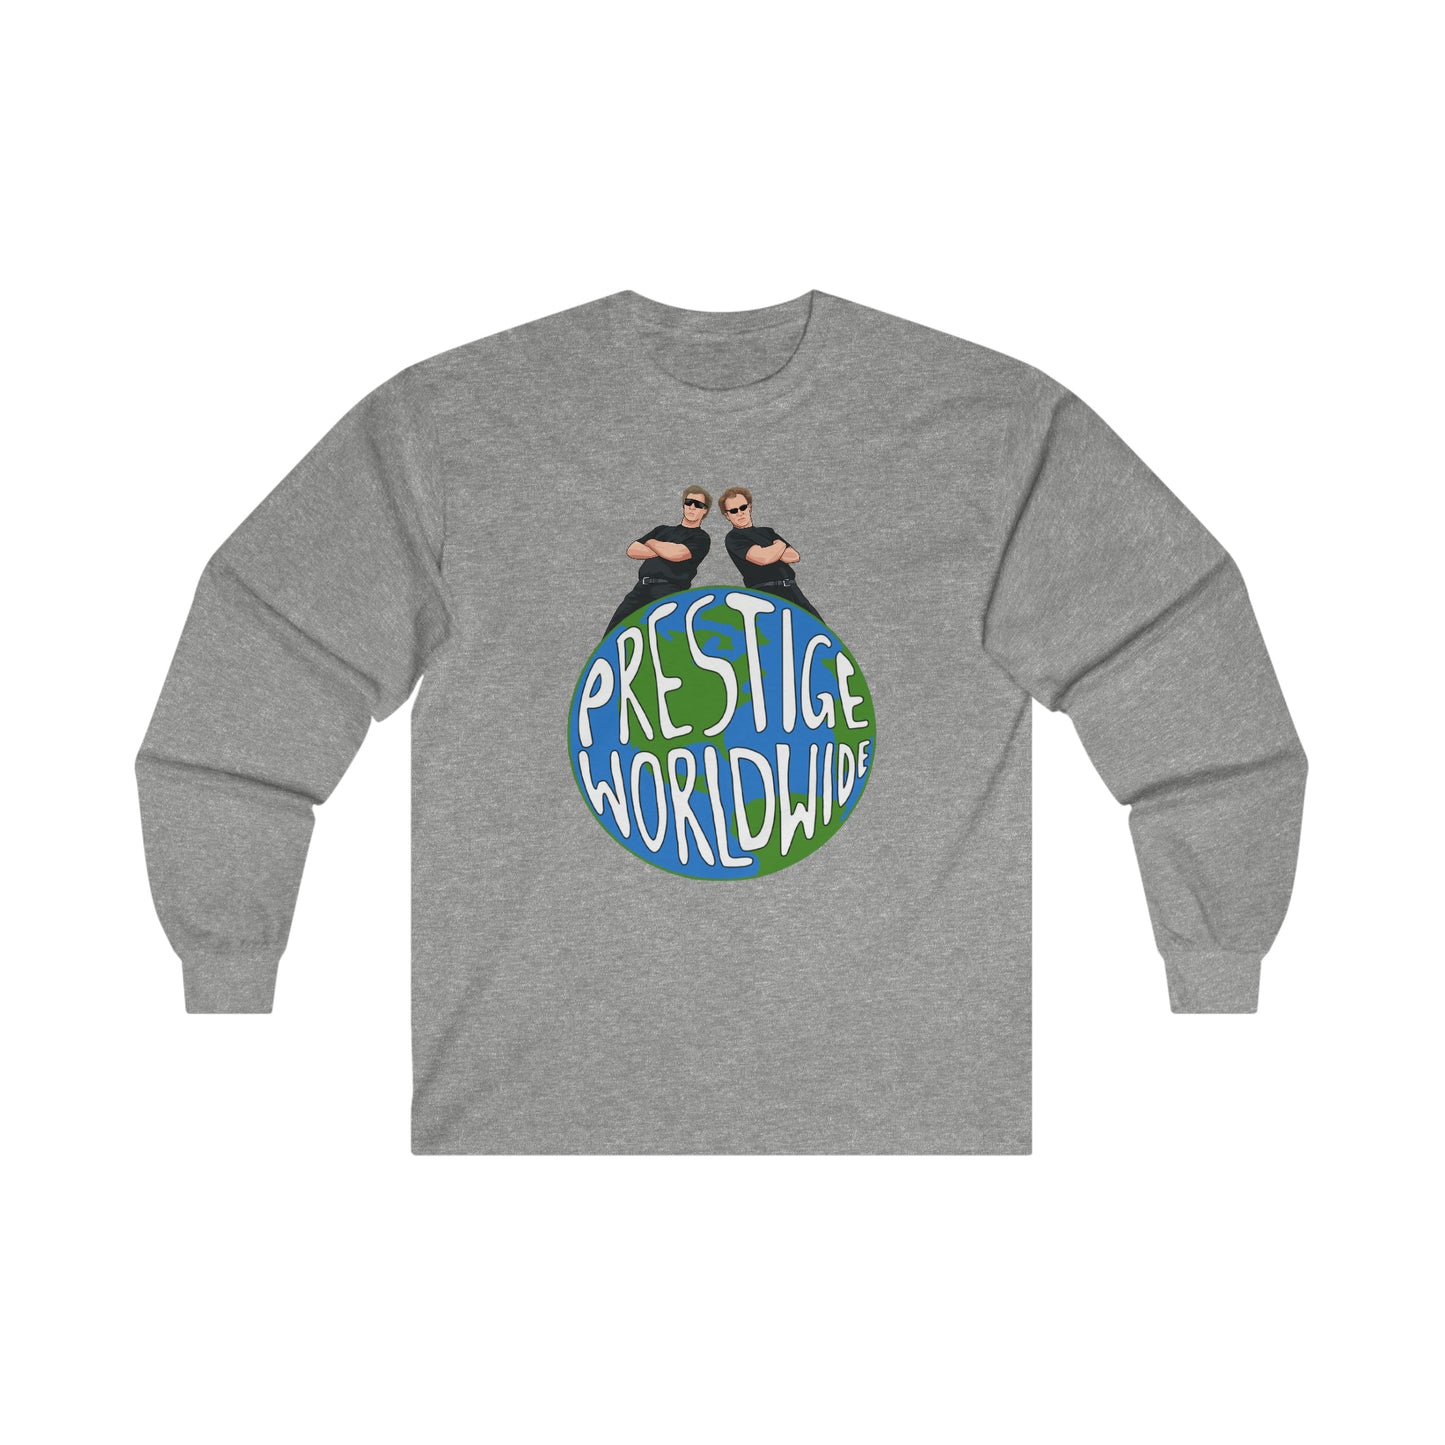 Step Brothers - Prestige Worldwide - Ultra Cotton Long Sleeve Tee - All Colors